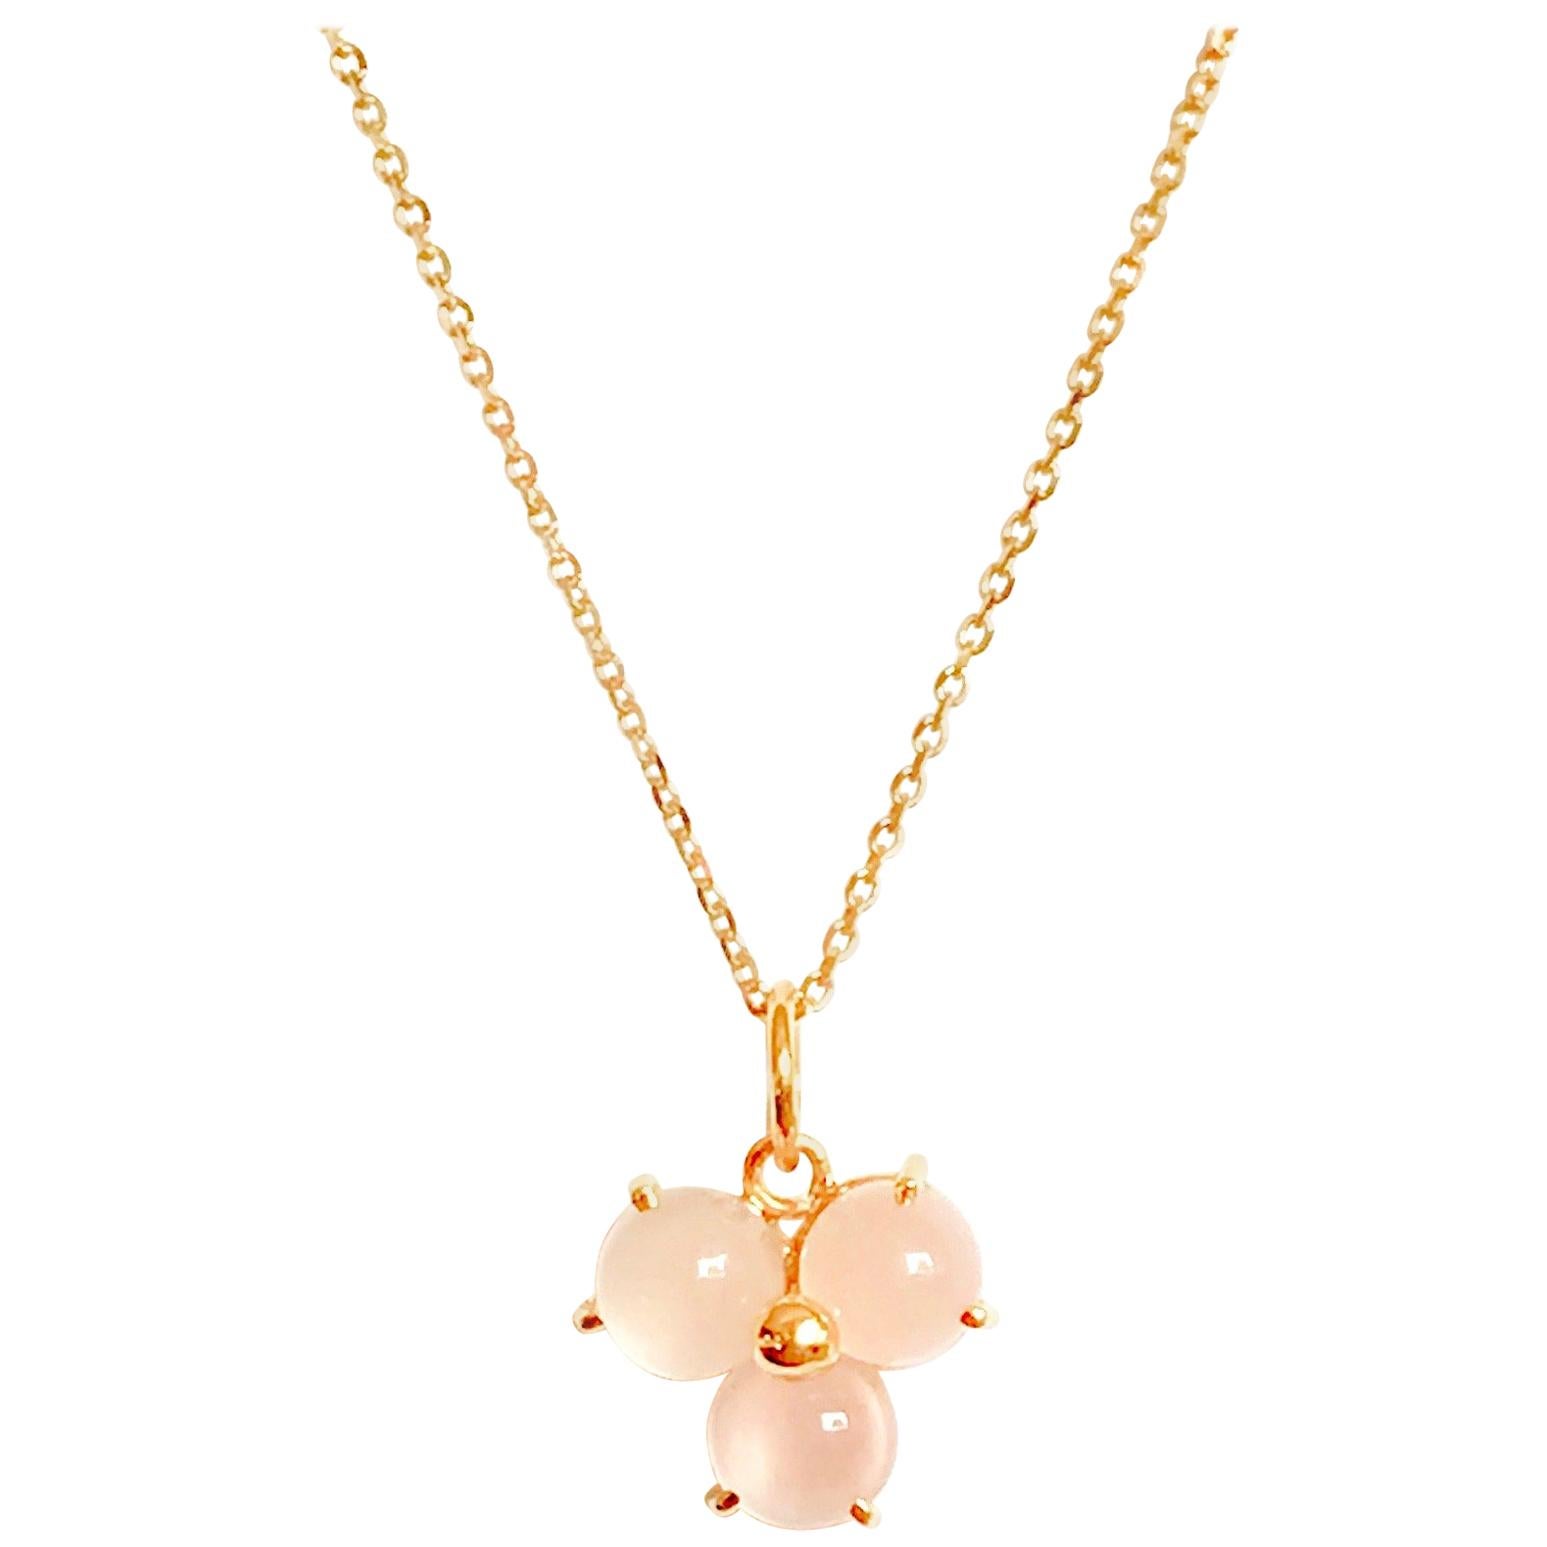 18 Karat Solid Yellow Gold Pink Blossom Flower Charm Pendant Chain Necklace For Sale